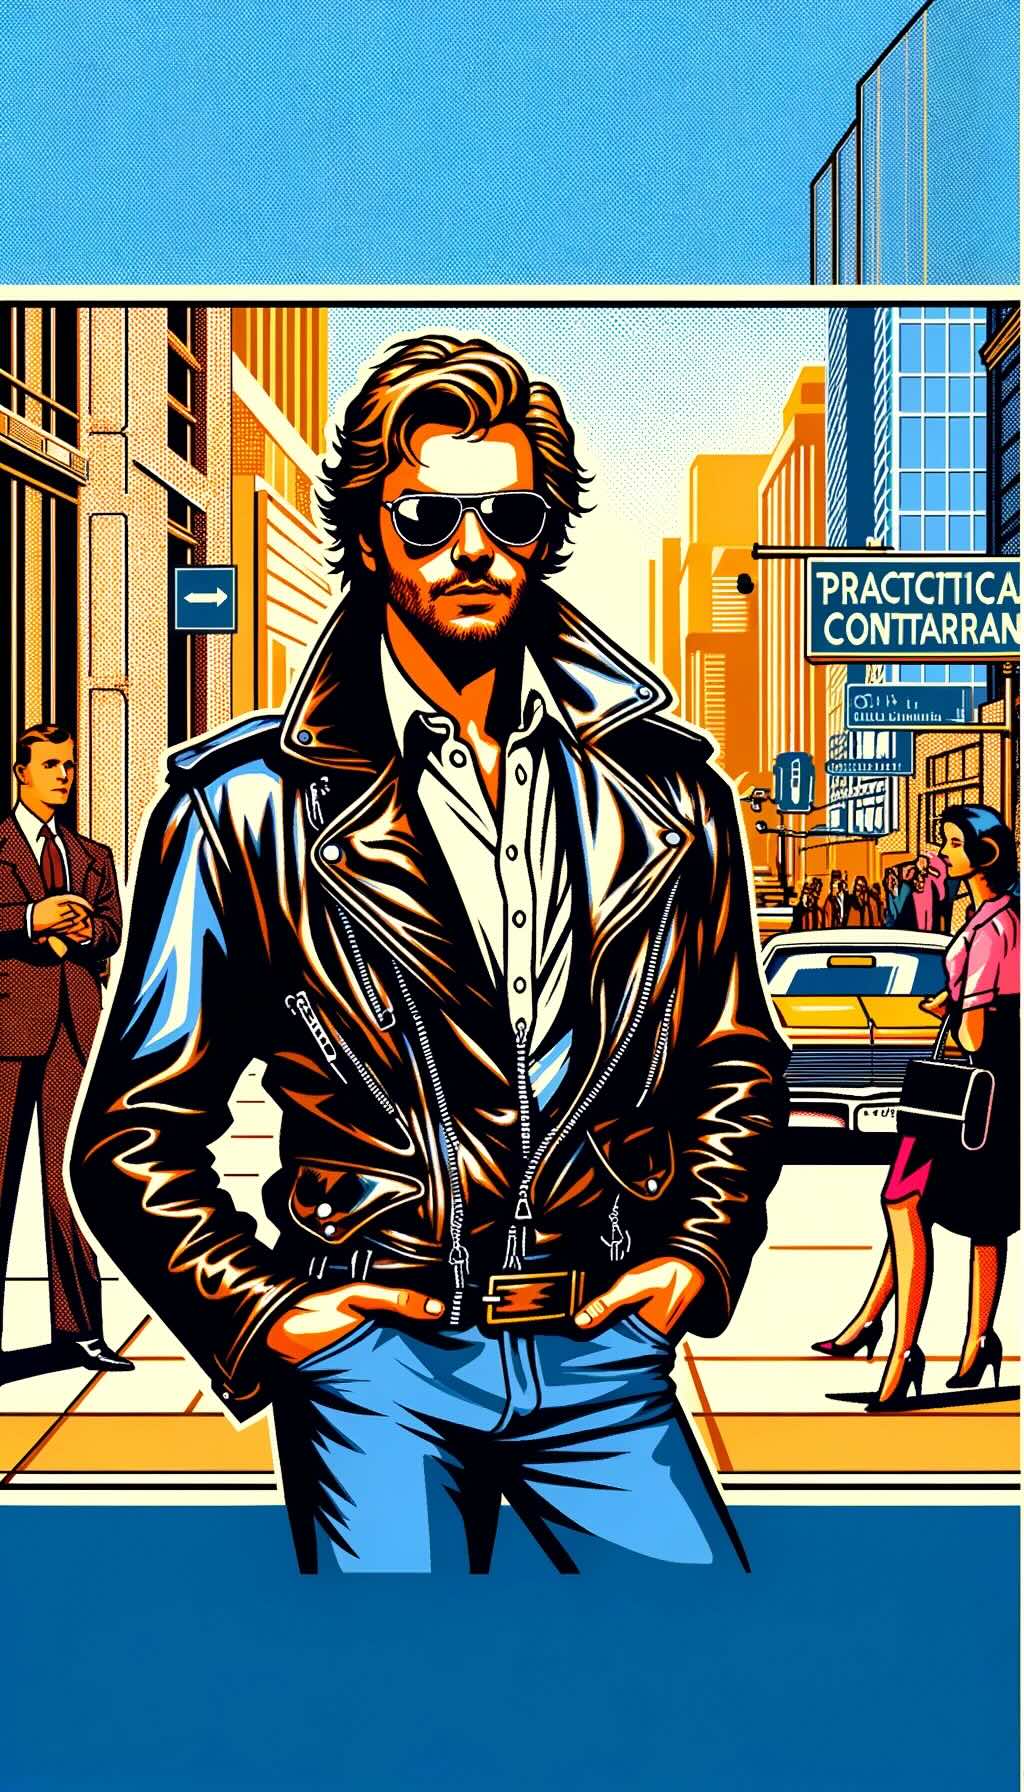 'practical contrarian' characterized as a maverick, inspired by the cool demeanor of Cool Hand Luke depicted wearing a leather jacket, embodying a cool and rebellious attitude, confidently standing out in the setting.